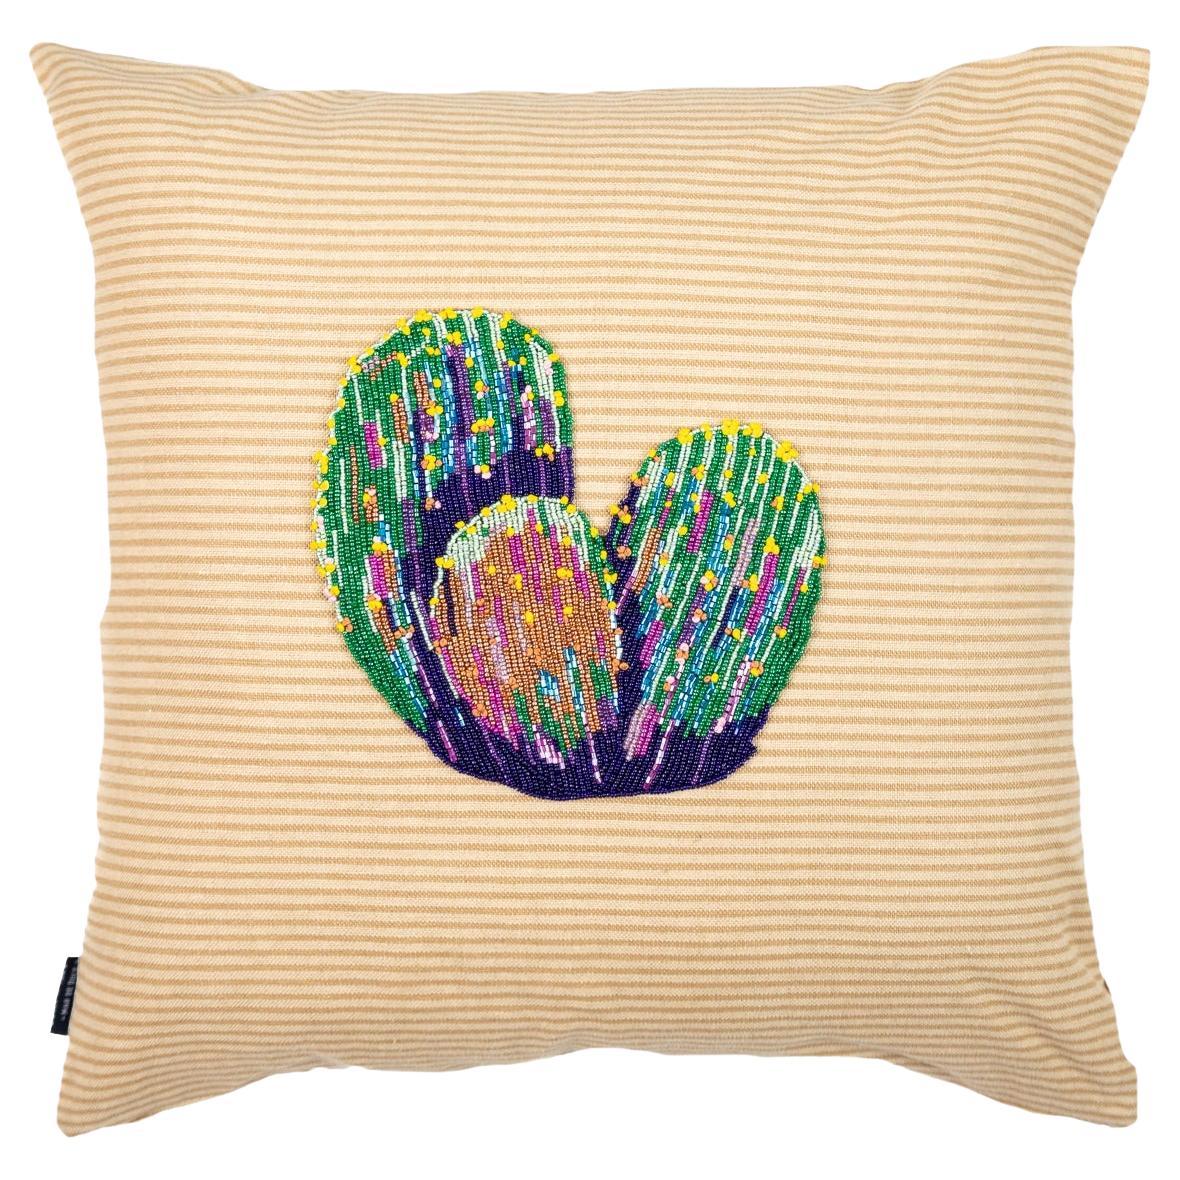 Imported Linen with hand embroidered applique - CACTUS by Mar de Doce For Sale